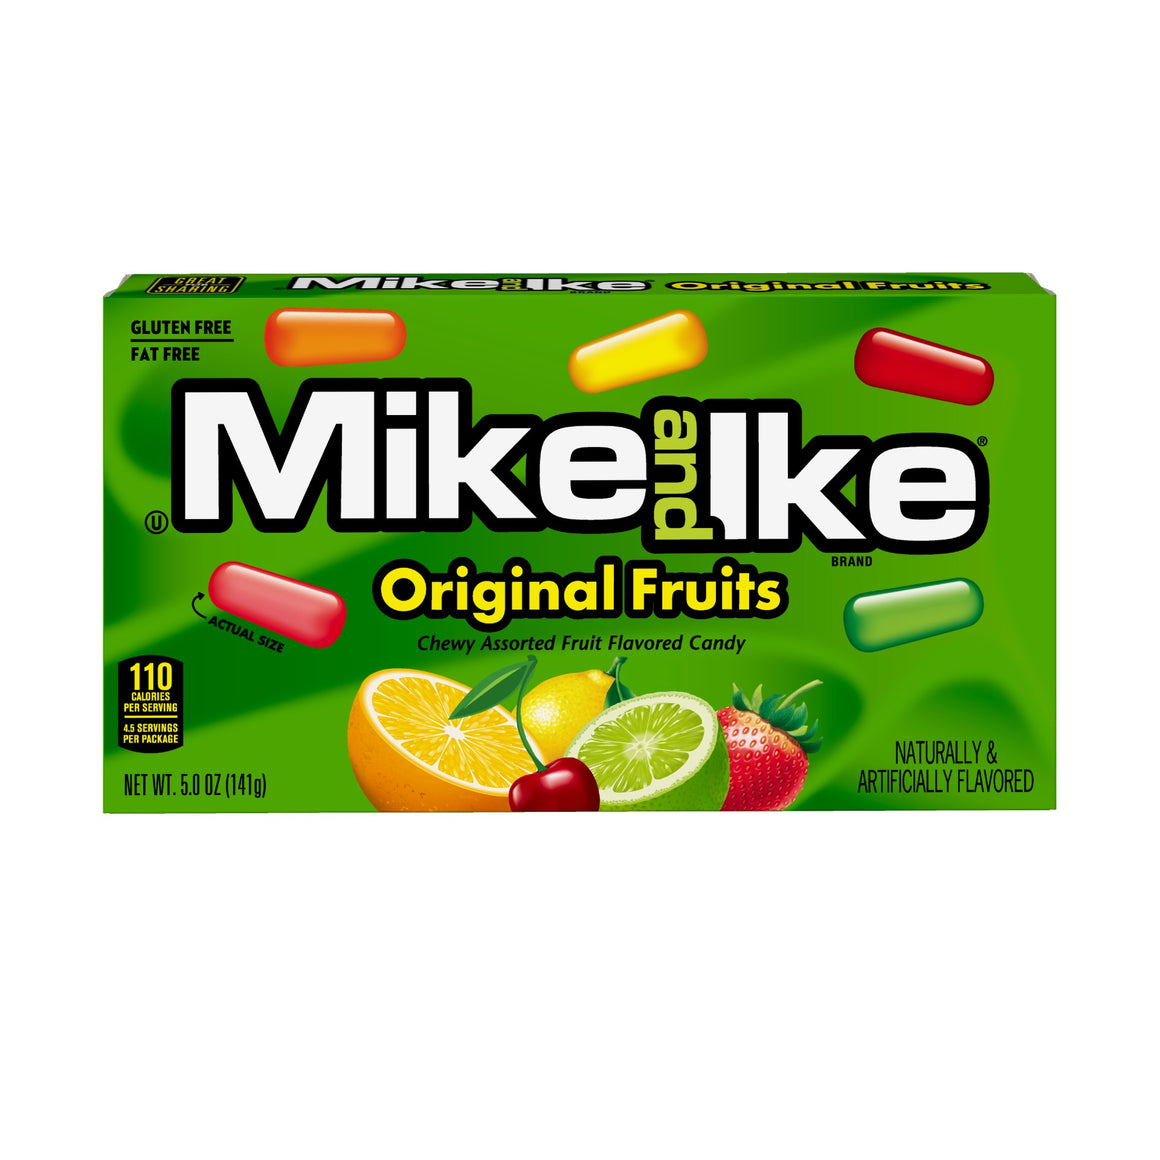 All City Candy Mike and Ike Original Fruits Chewy Candies - 5 oz. Theater Box 1 Box Theater Boxes Just Born Inc For fresh candy and great service, visit www.allcitycandy.com